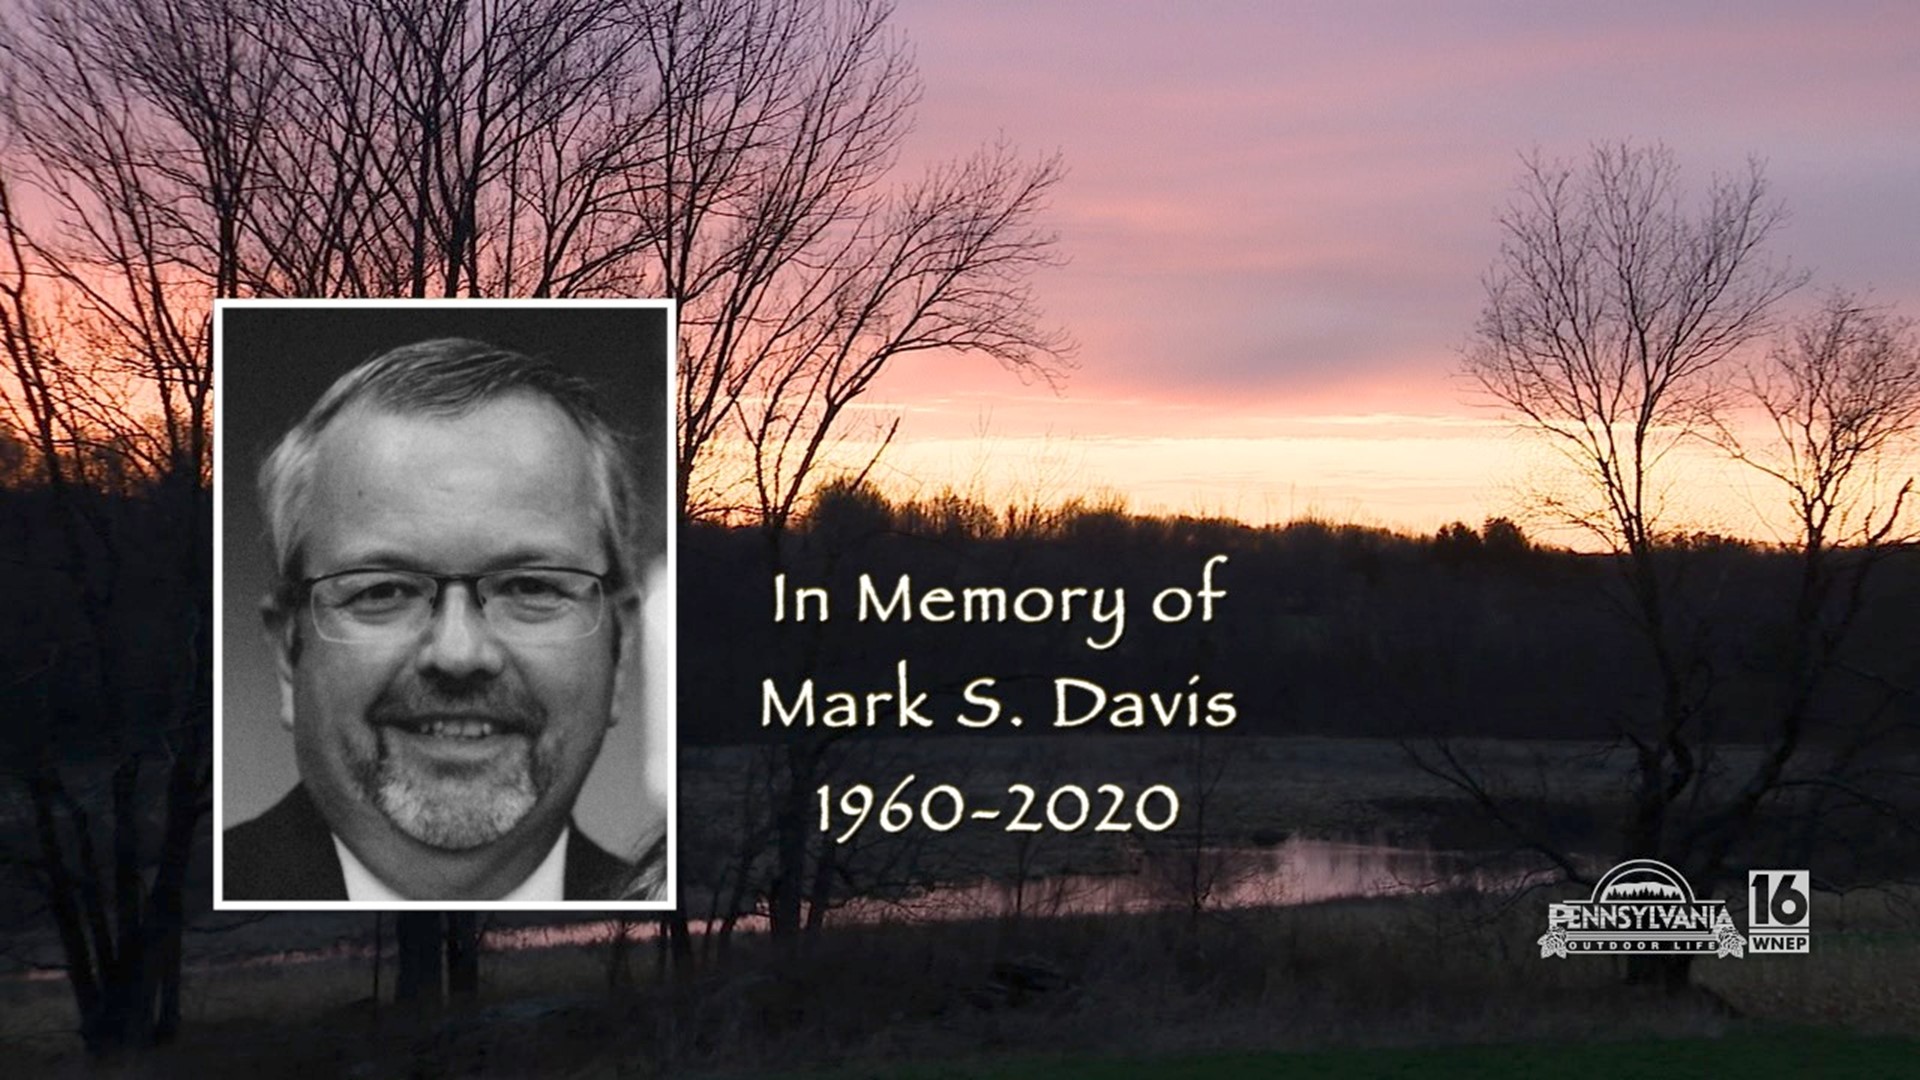 Remembering the life of a true conservationist and friend.